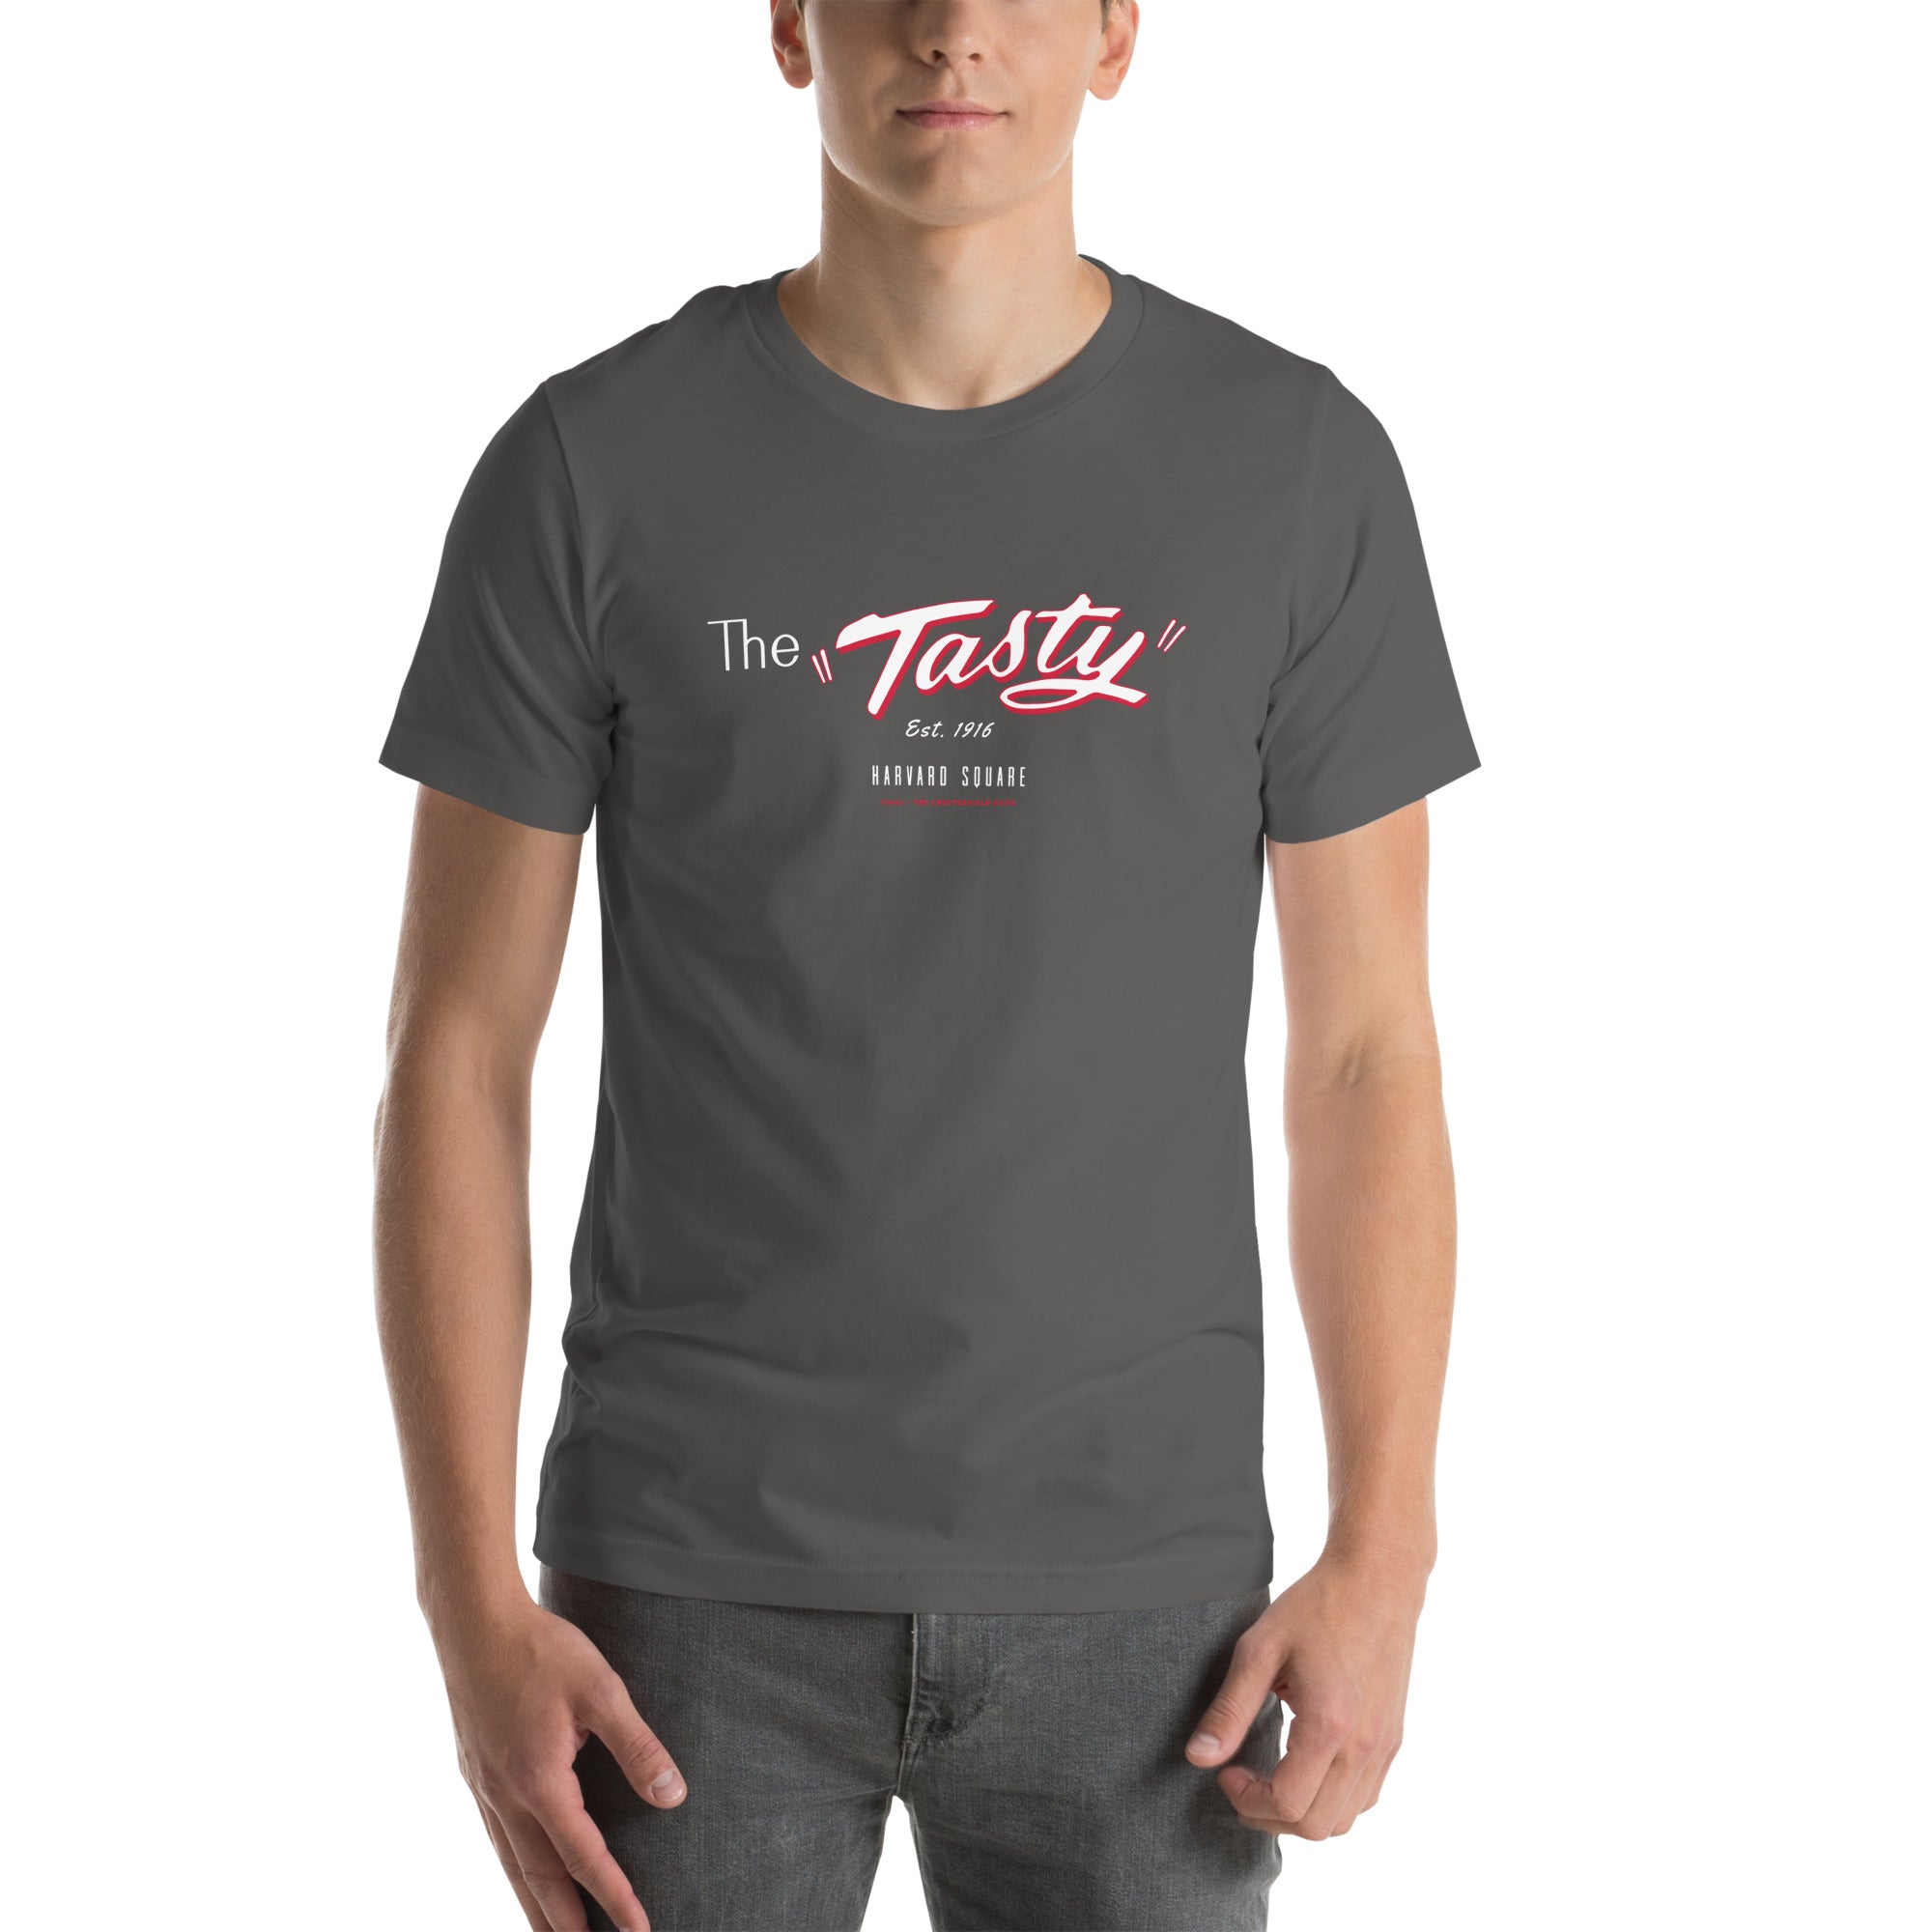 man wearing Dark grey unisex t-shirt with the iconic The Tasty design Harvard Square